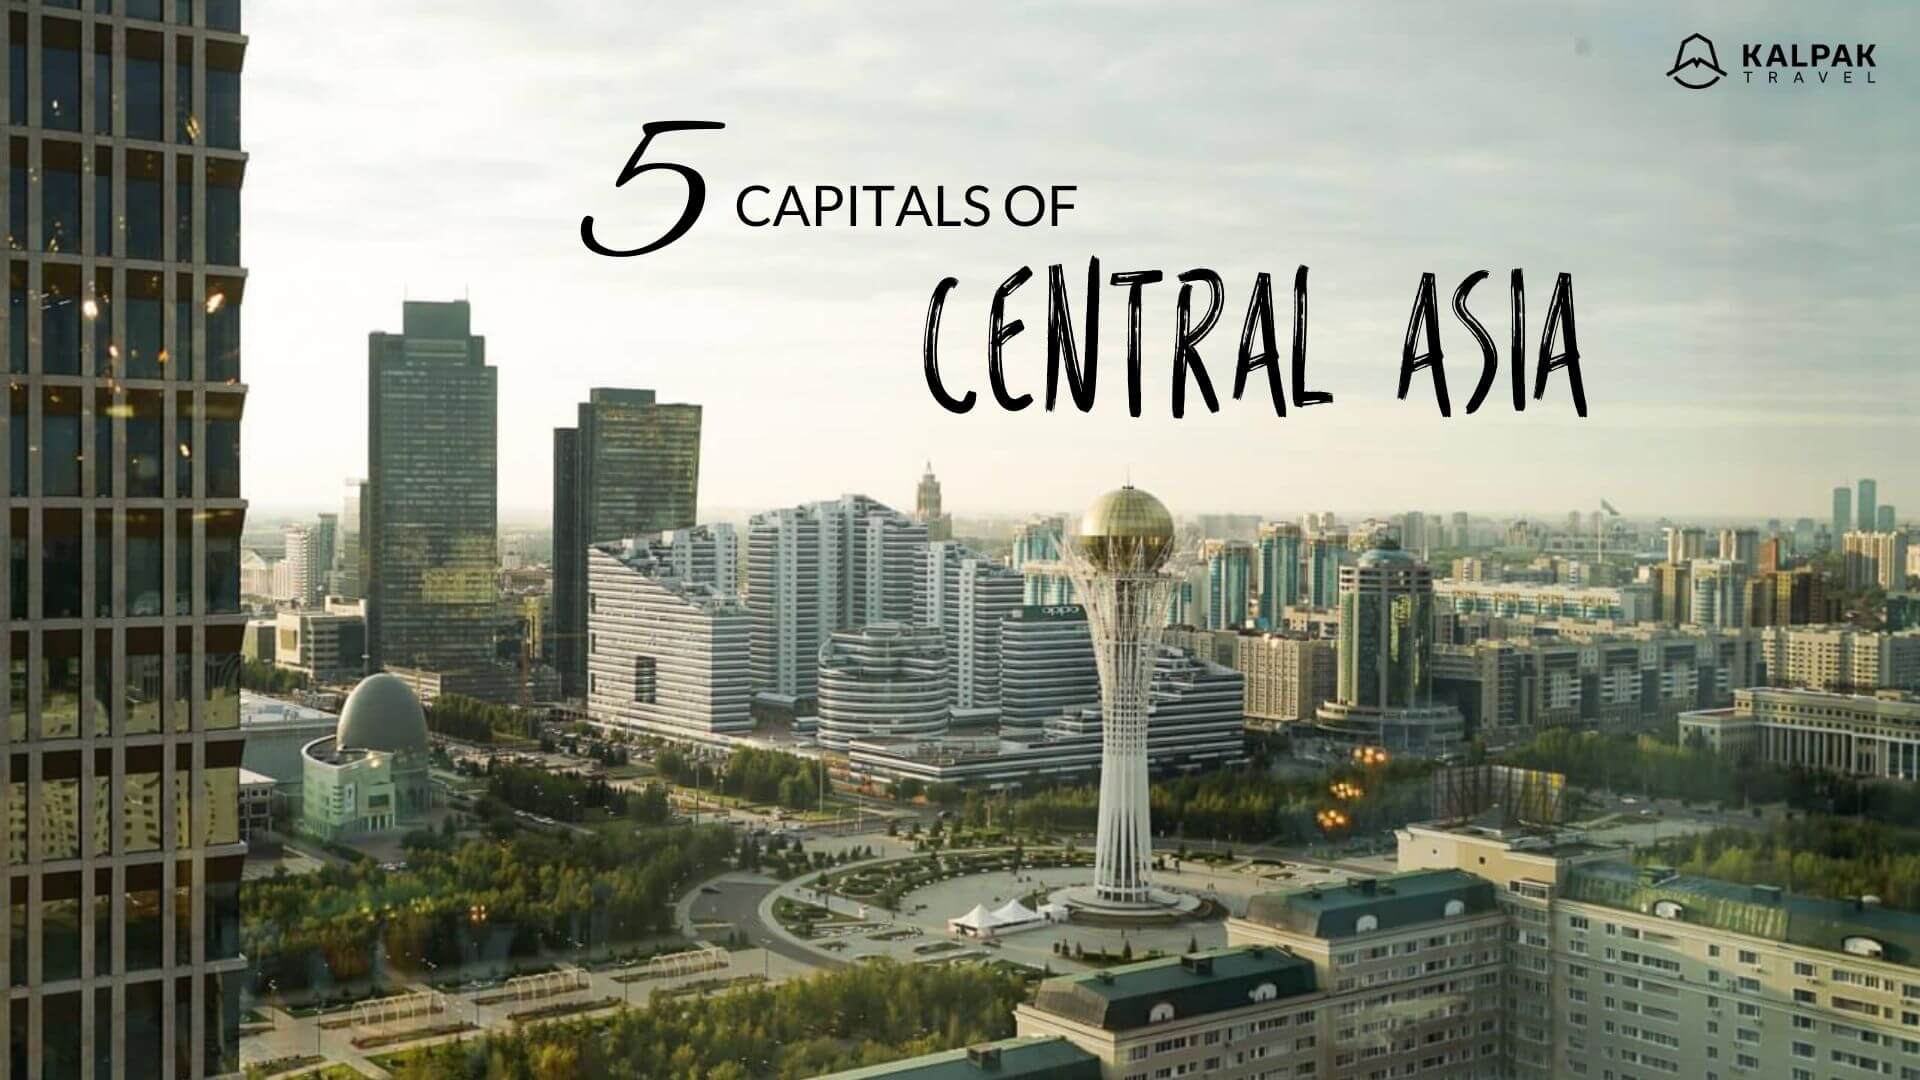 5 capitals of Central Asia